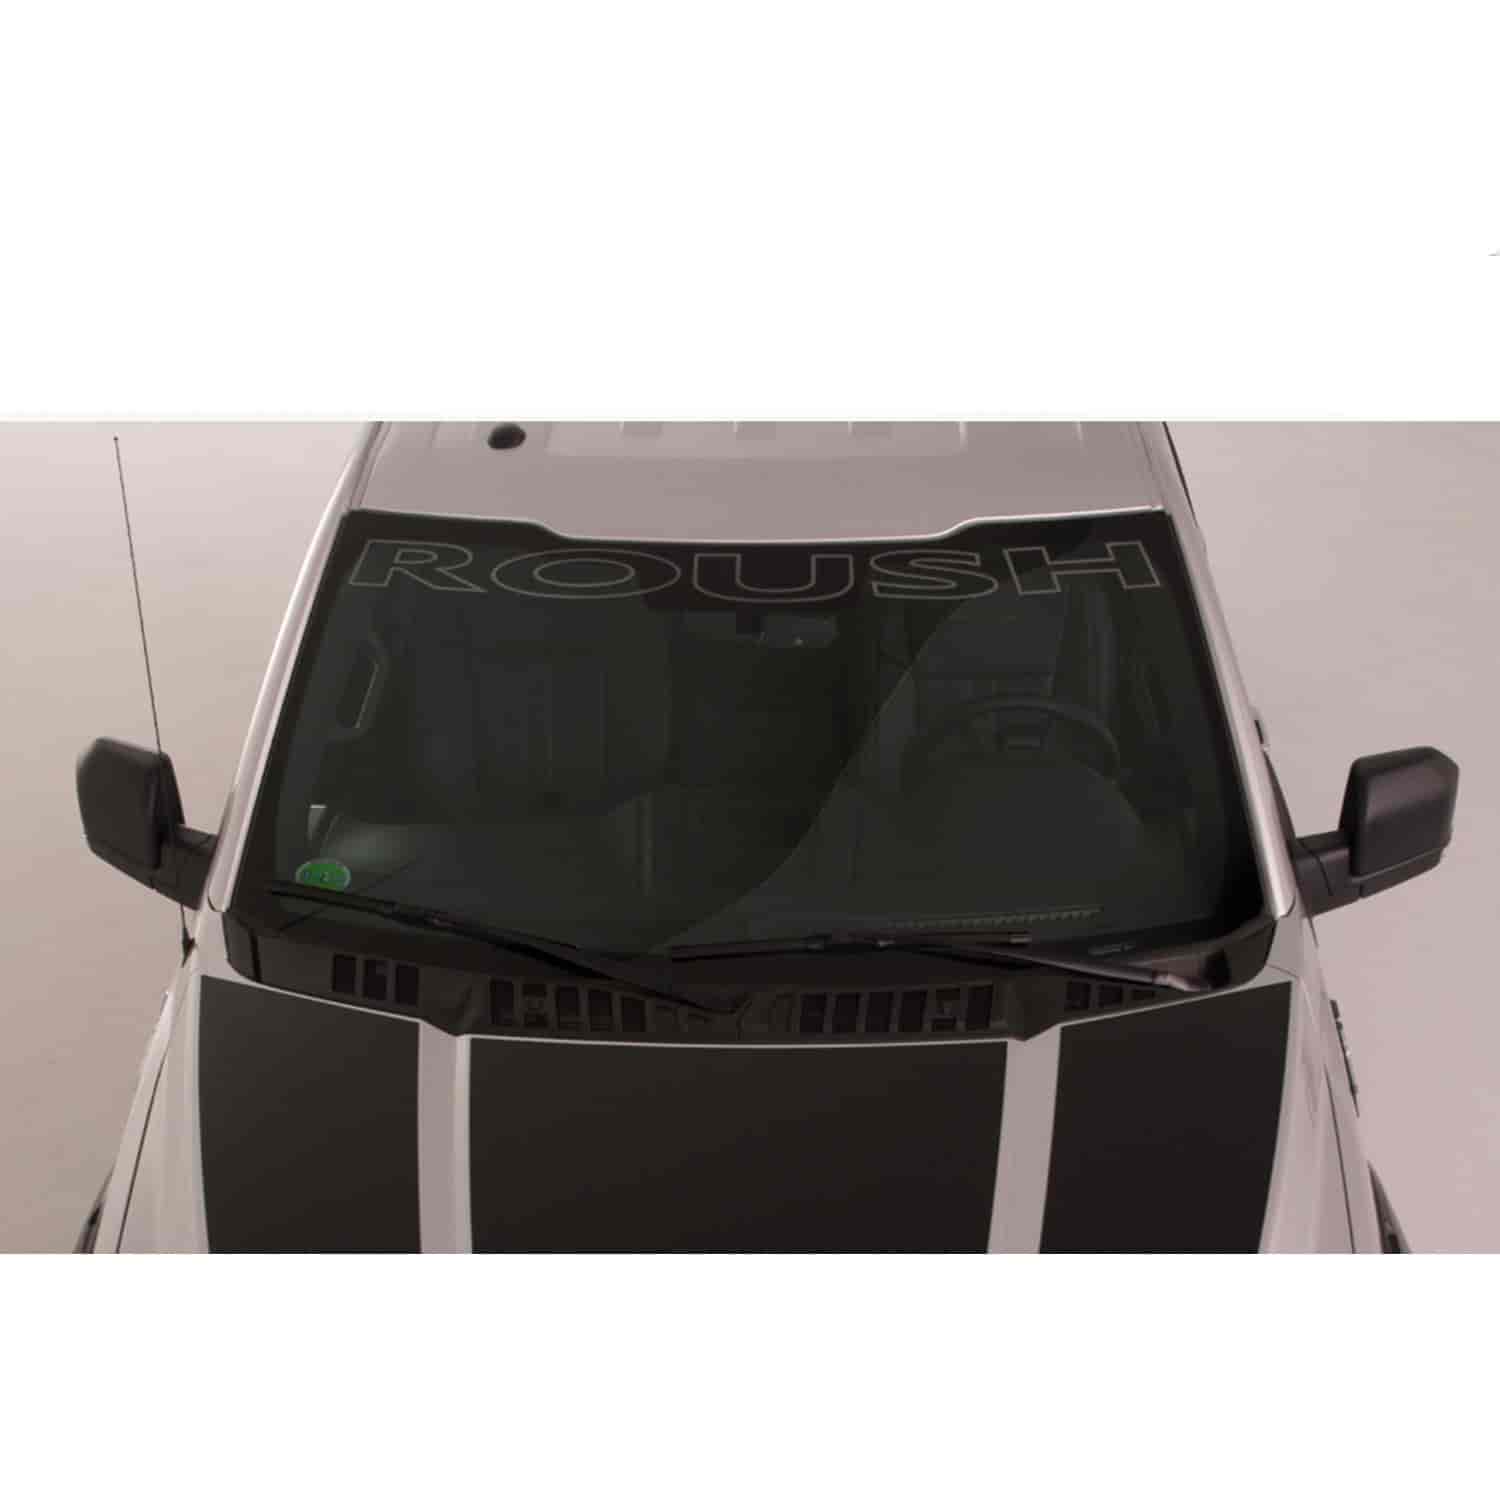 Front Windshield Roush Window Banner for 2015-Up Ford F-150